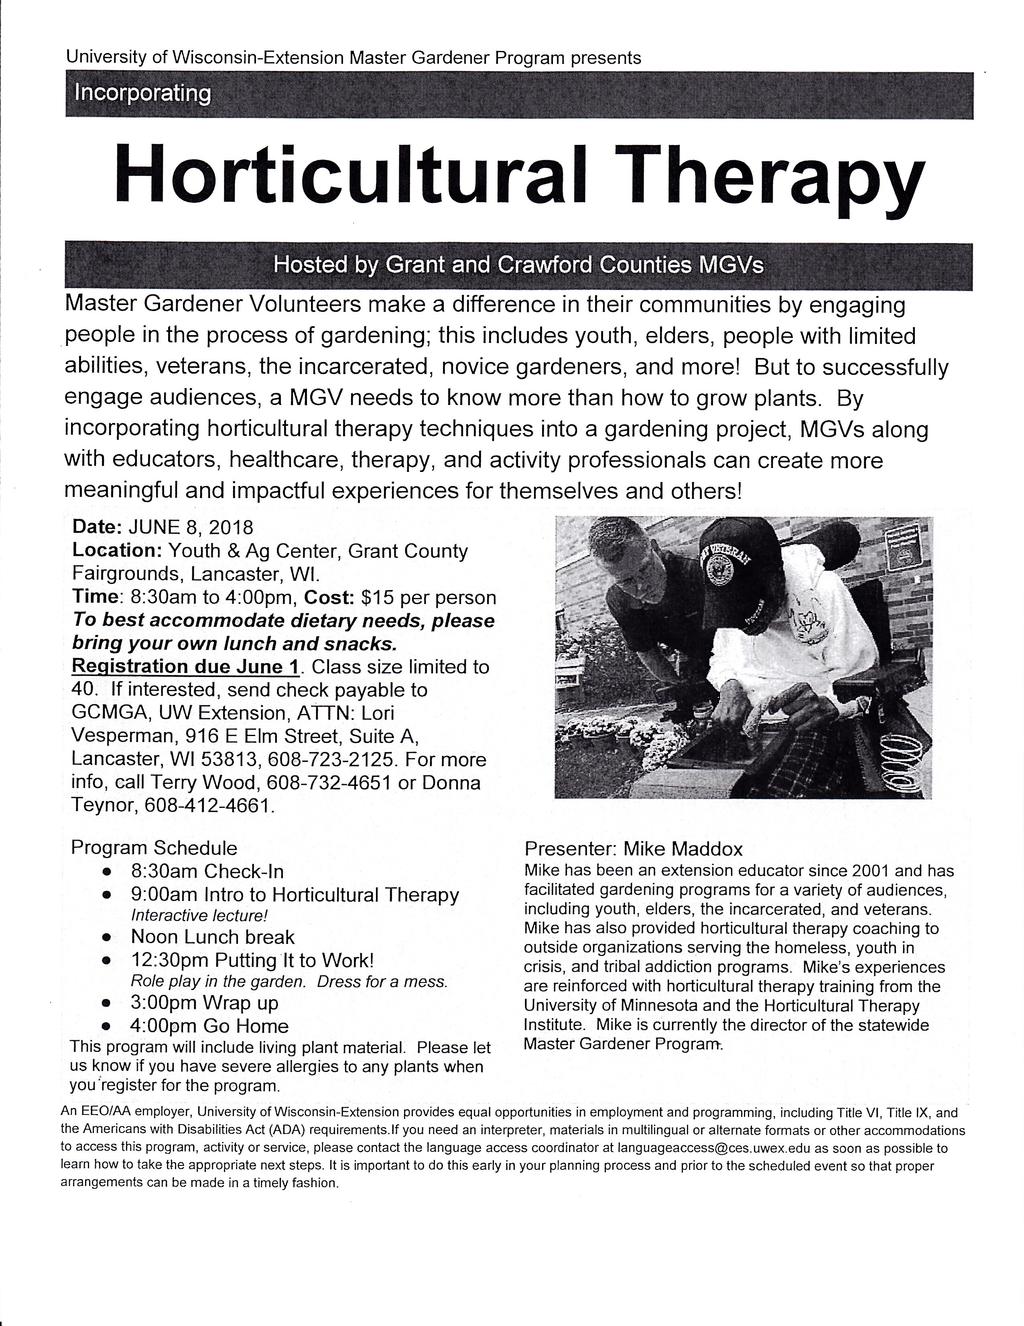 Upcoming Events for June Horticulture Theraby Workshop Friday, June 8th 8:30am to 4:00pm Cost: $15